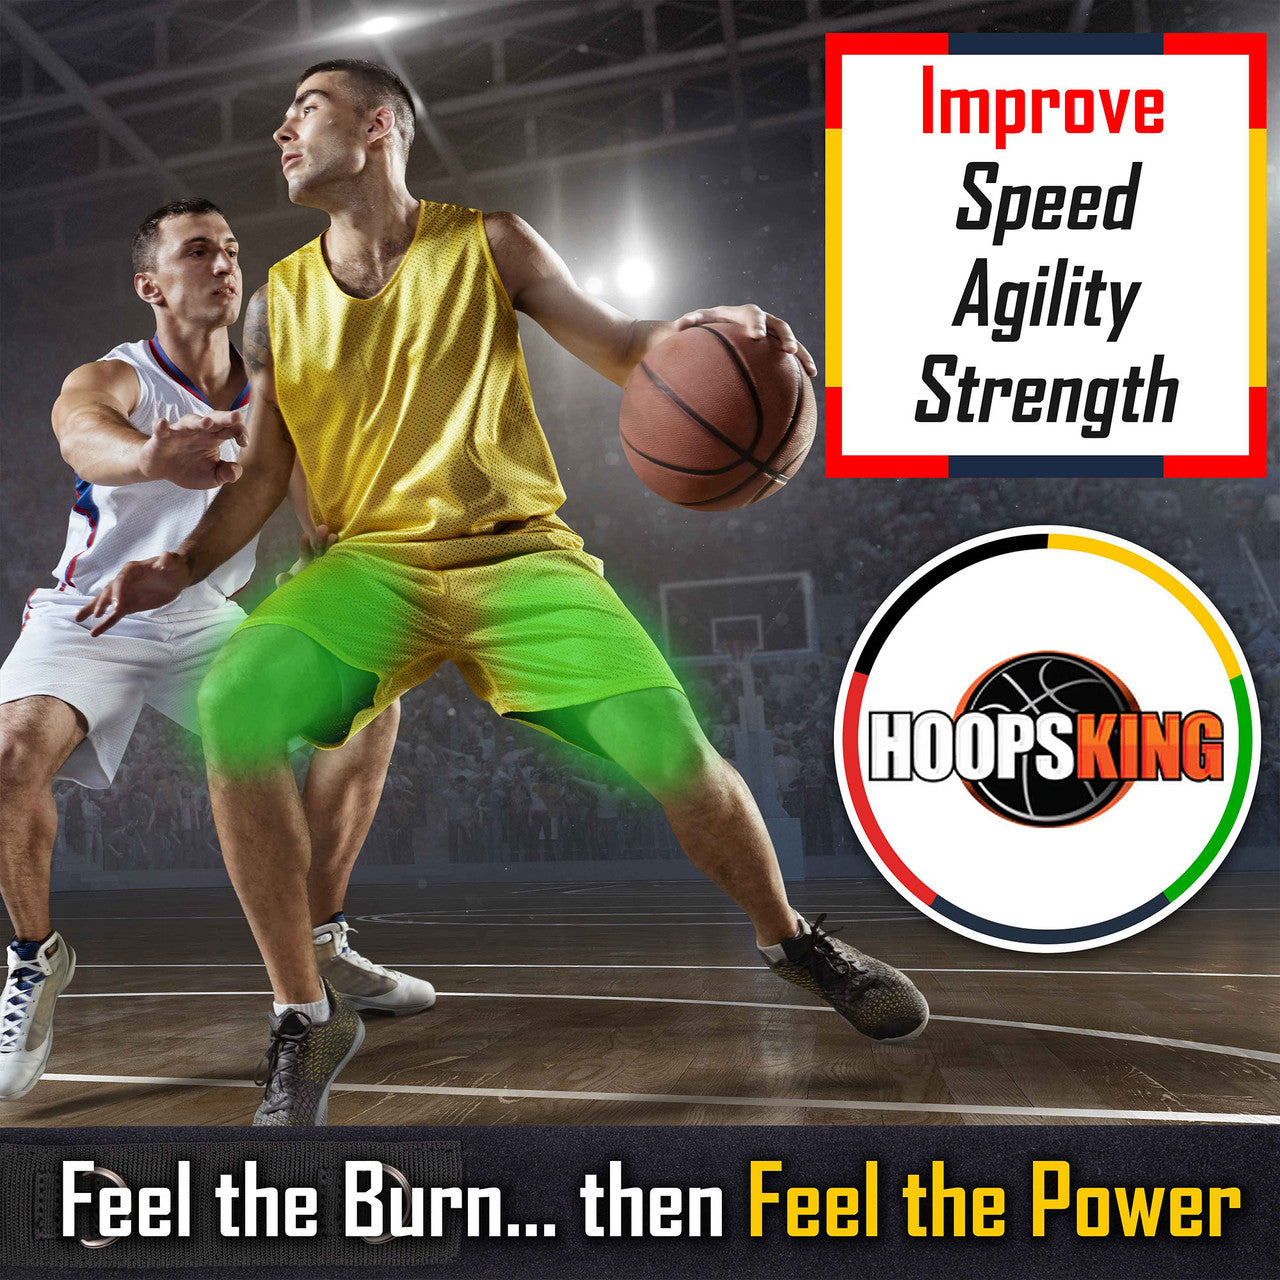 Use the LockDown Defender bands to increase lateral quickness for your basketball players.